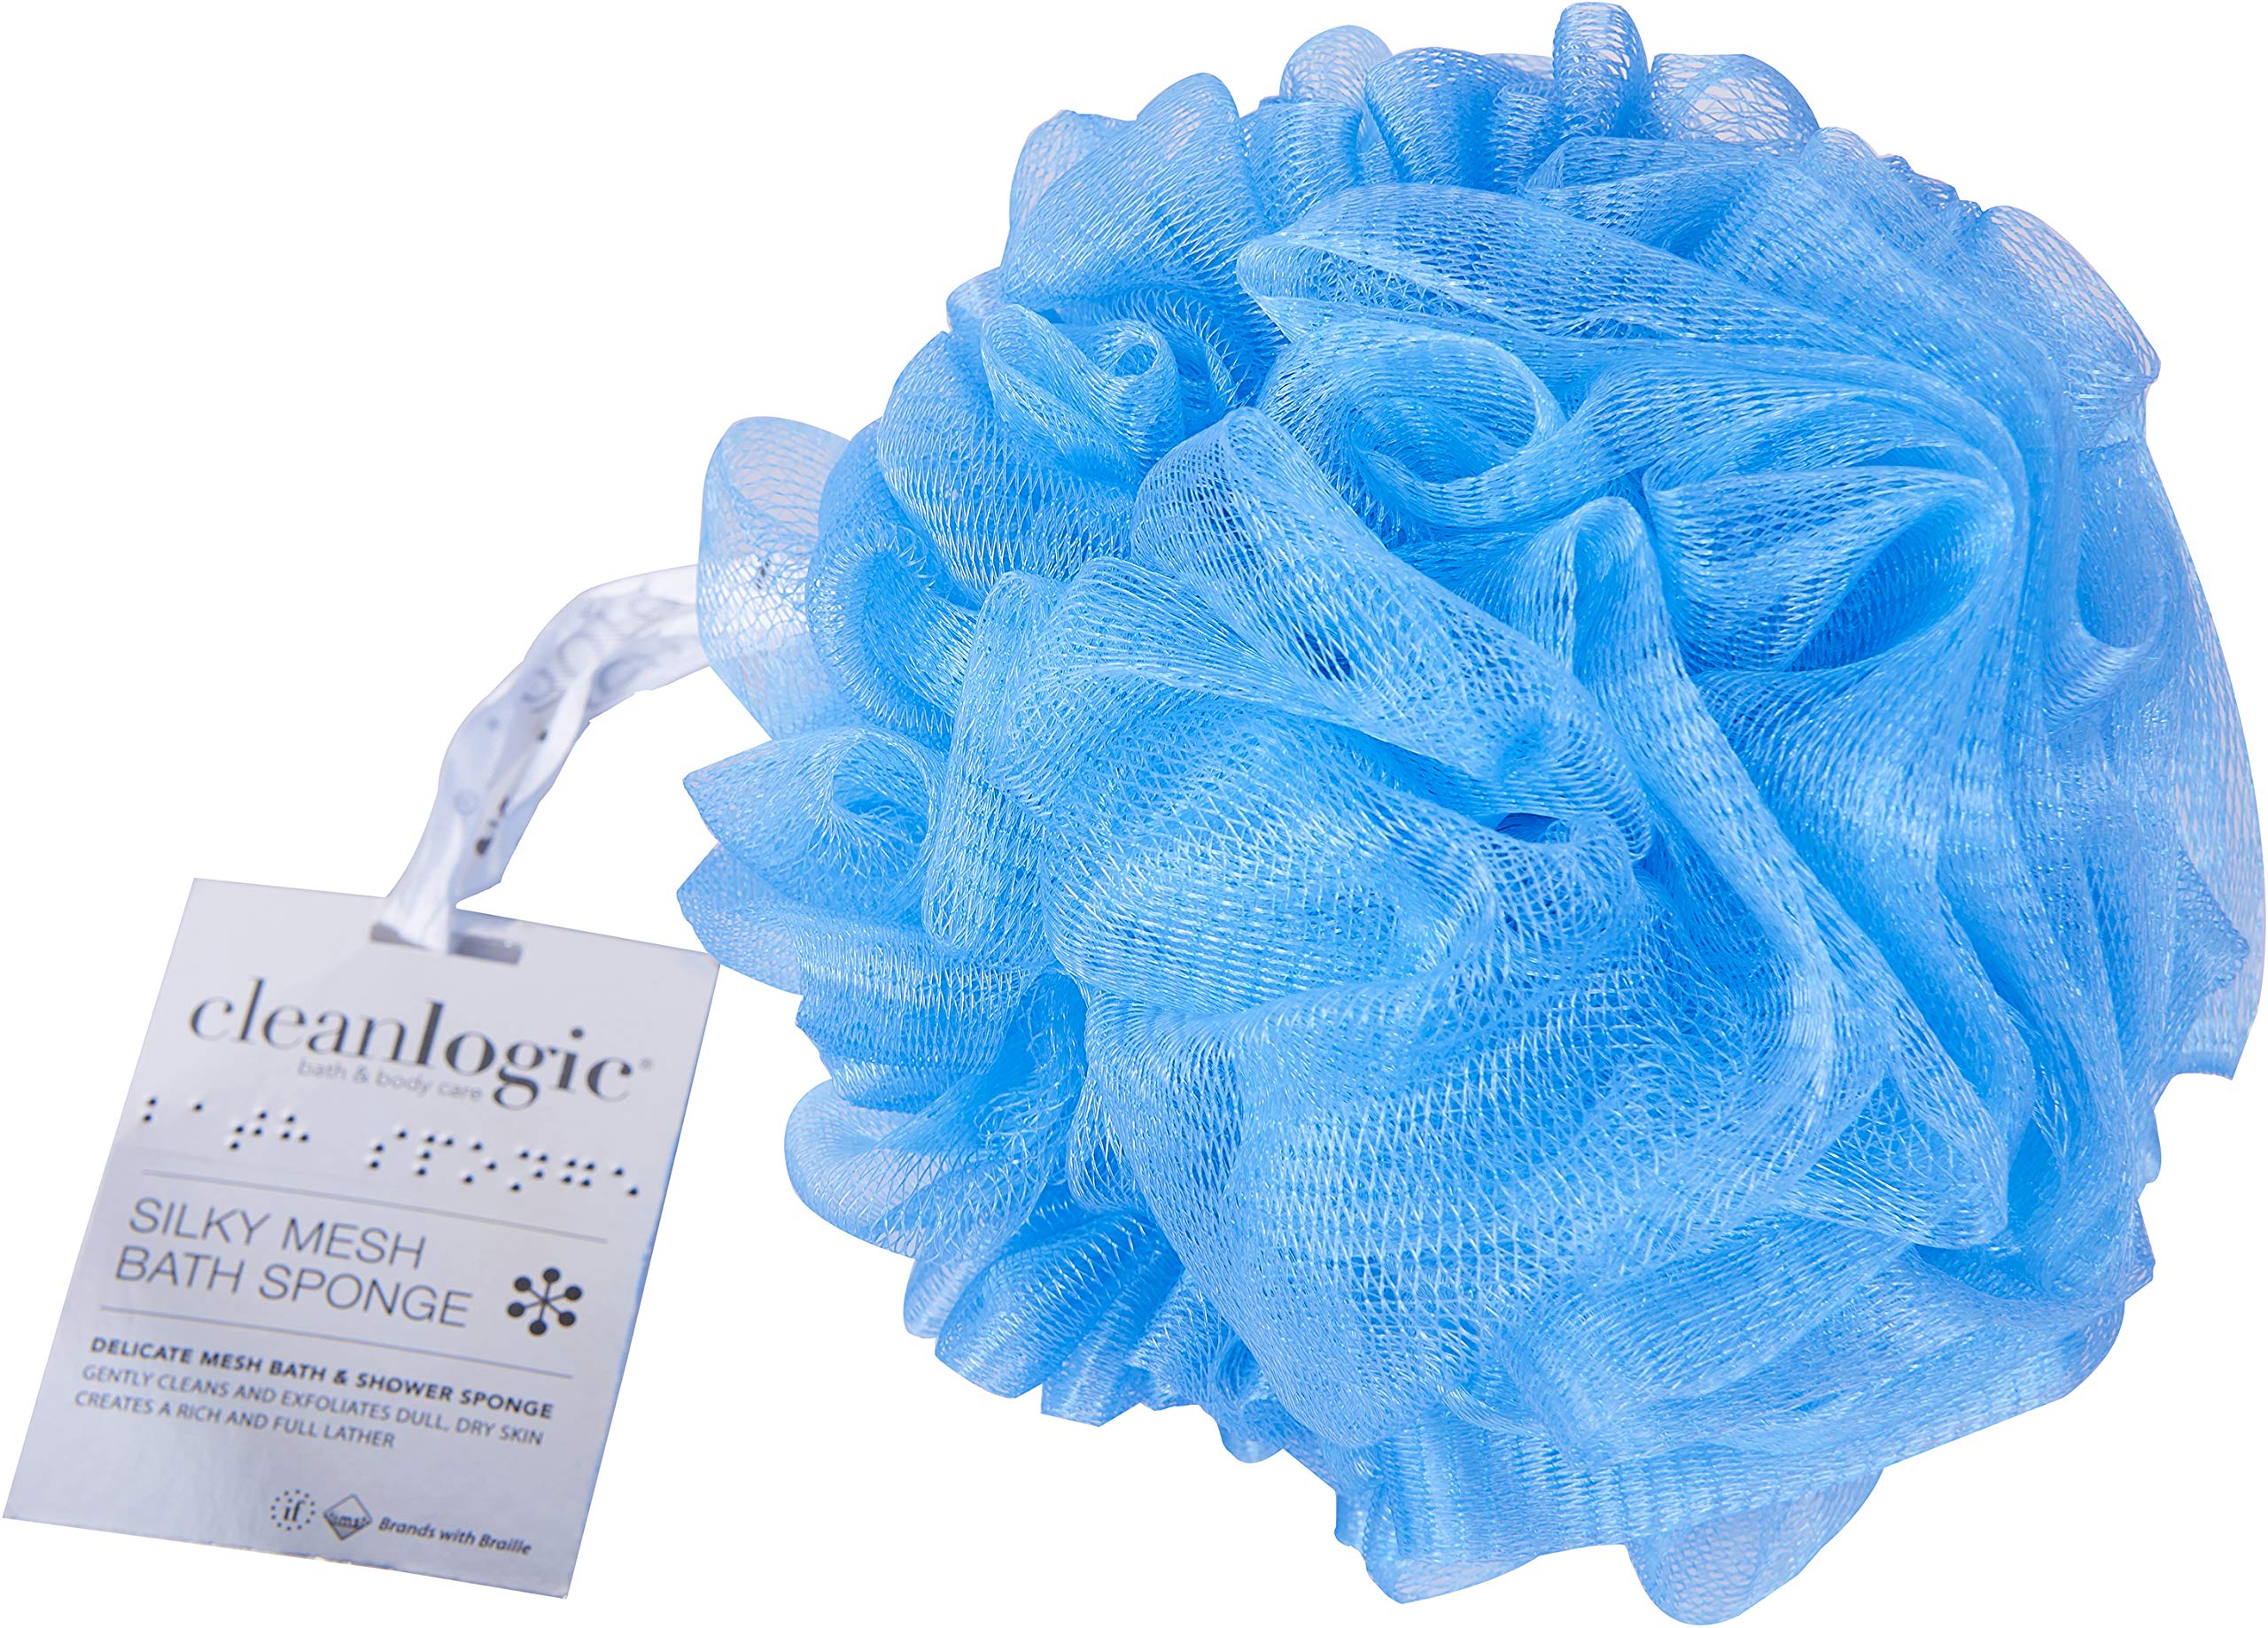 Clean Logic Bath and Body Silky-Soft Mesh Sponge 70 Grams Assorted Colors  (Pack of 6)